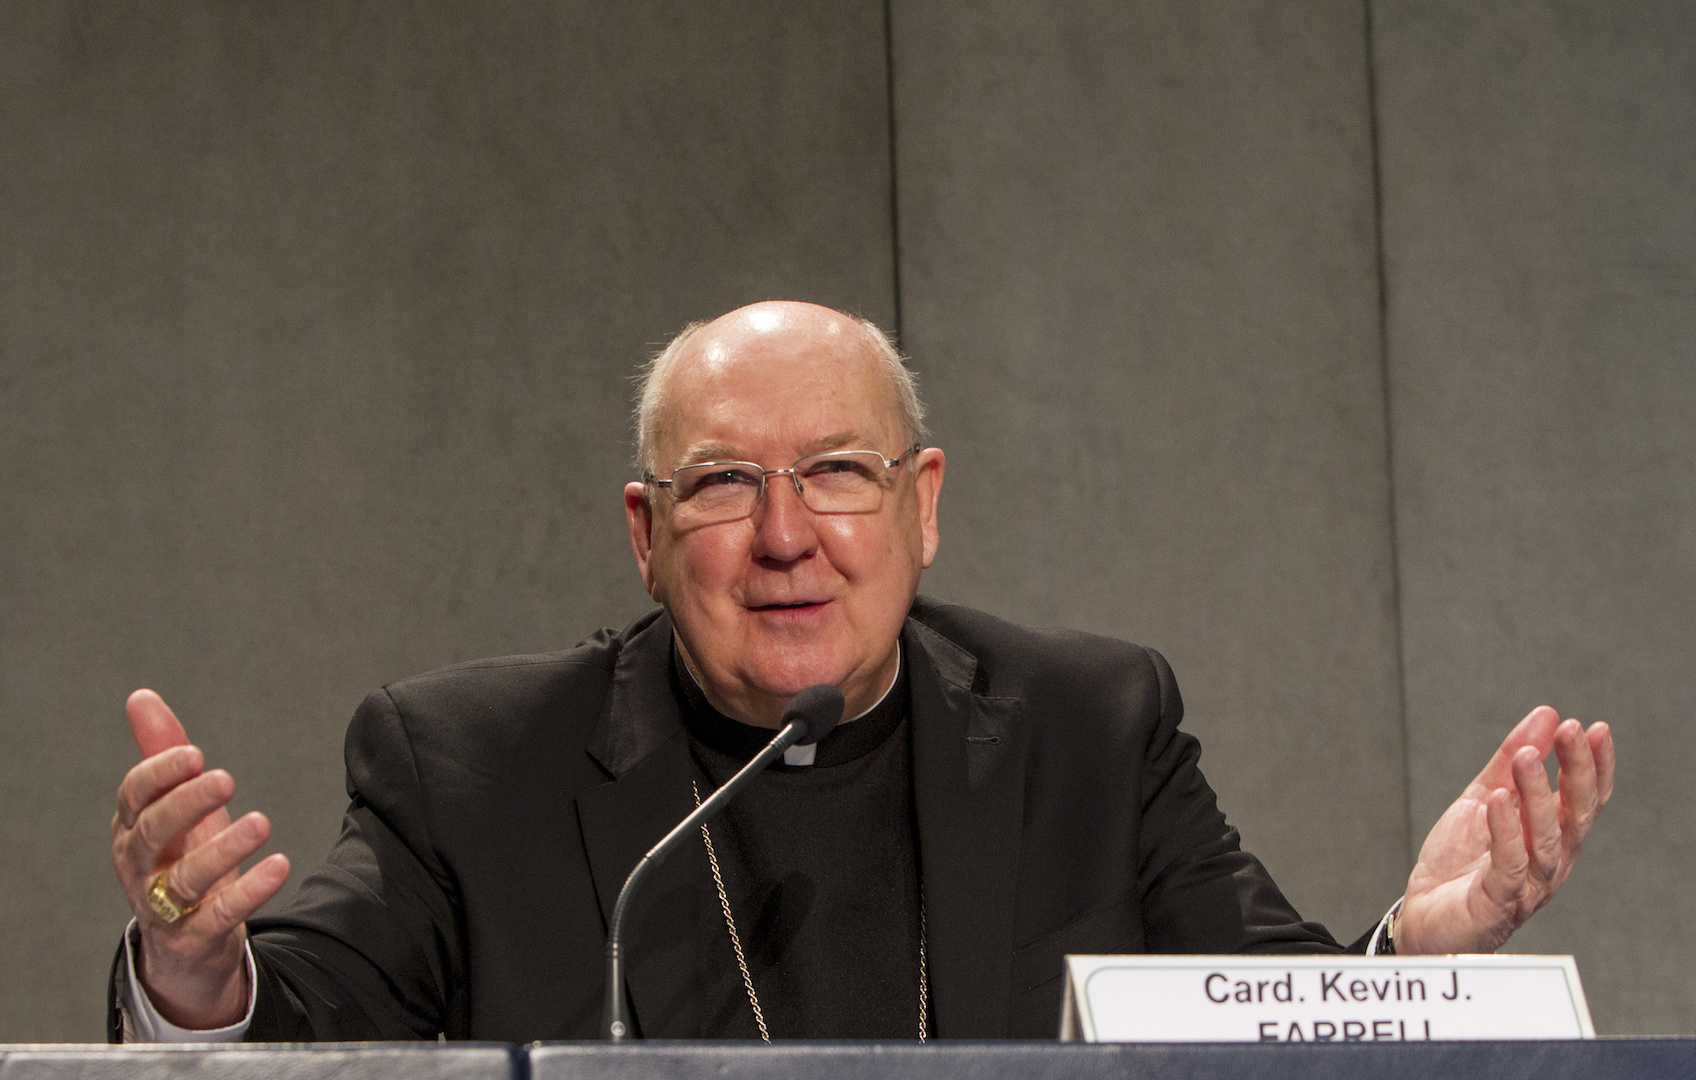 Cardinal Kevin J. Farrell, prefect of the Dicastery for the Laity, Family and Life, answers questions at a Vatican news conference on the 2018 World Meeting of Families, which will be held in Dublin. (CNS photo/Robert Duncan) 